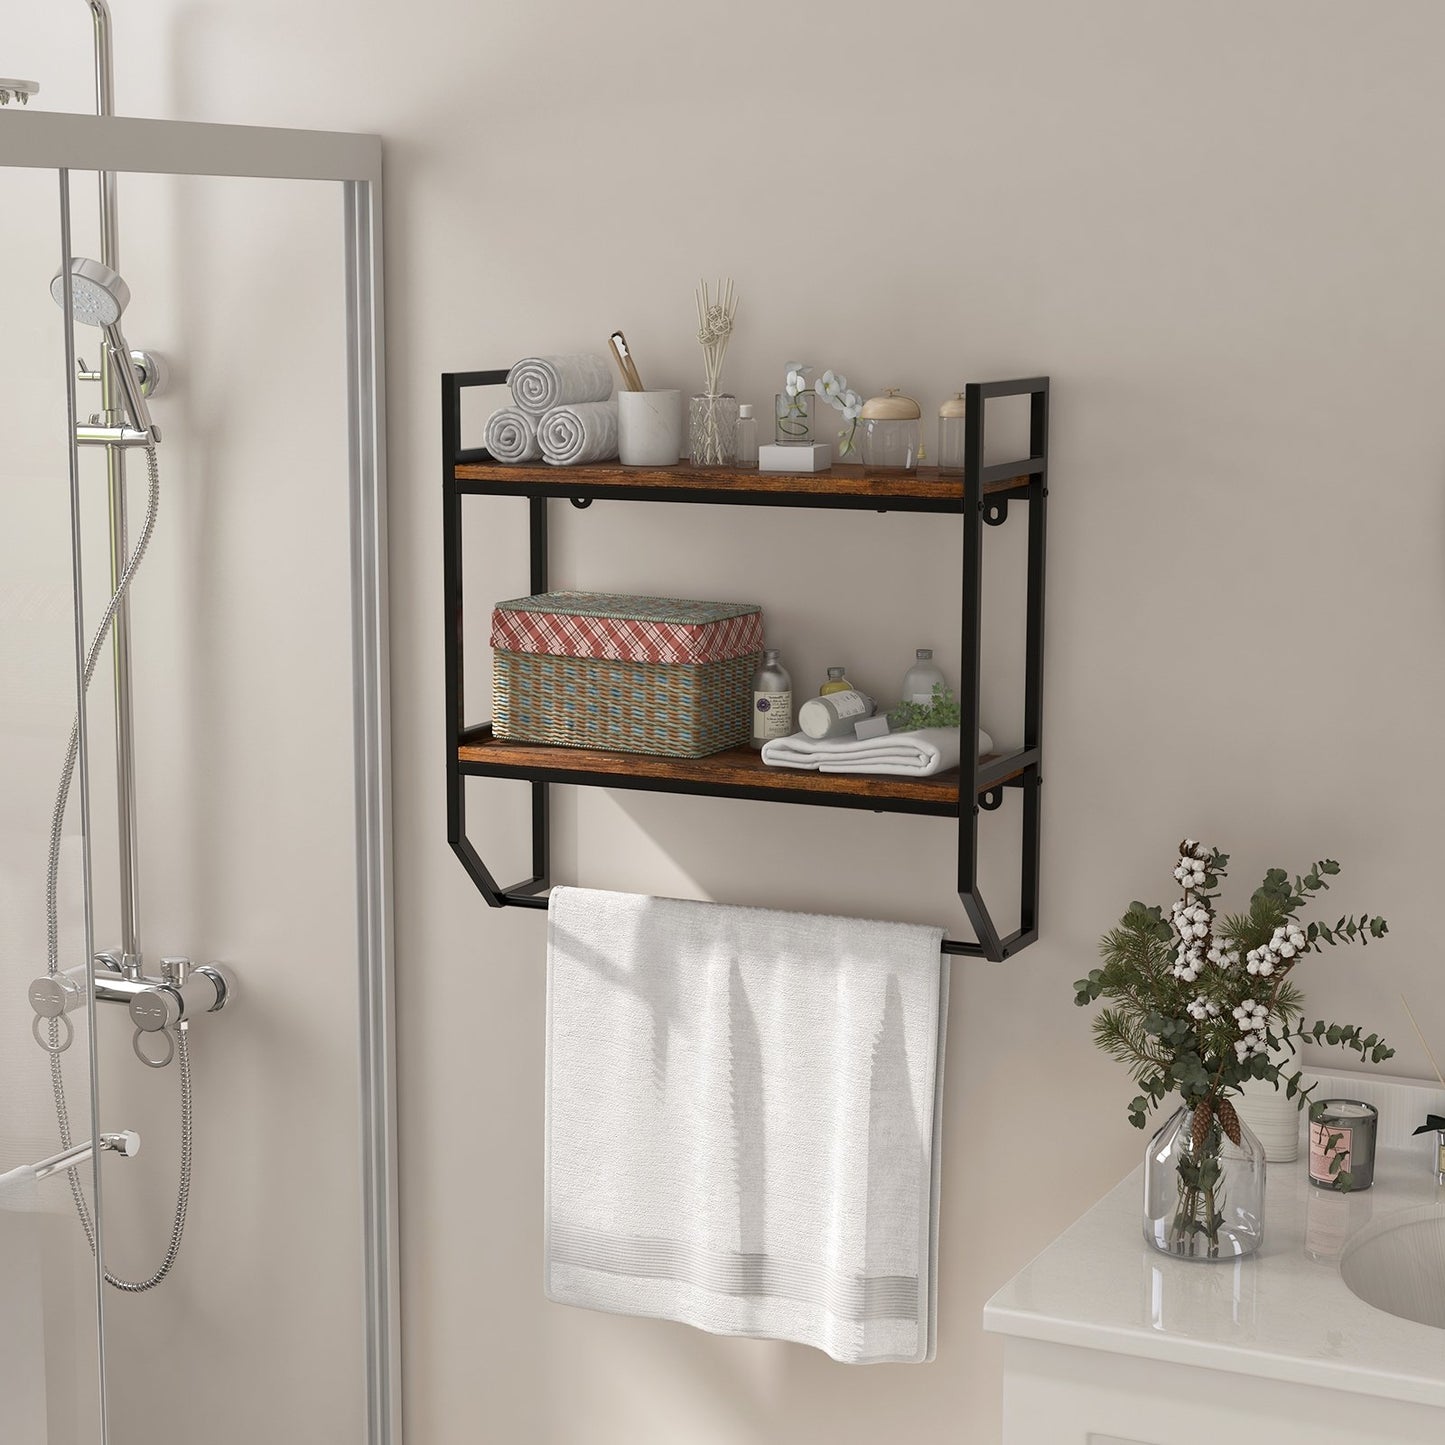 Over the Toilet Shelf Wall Mounted with Metal Frame for Bathroom, Black